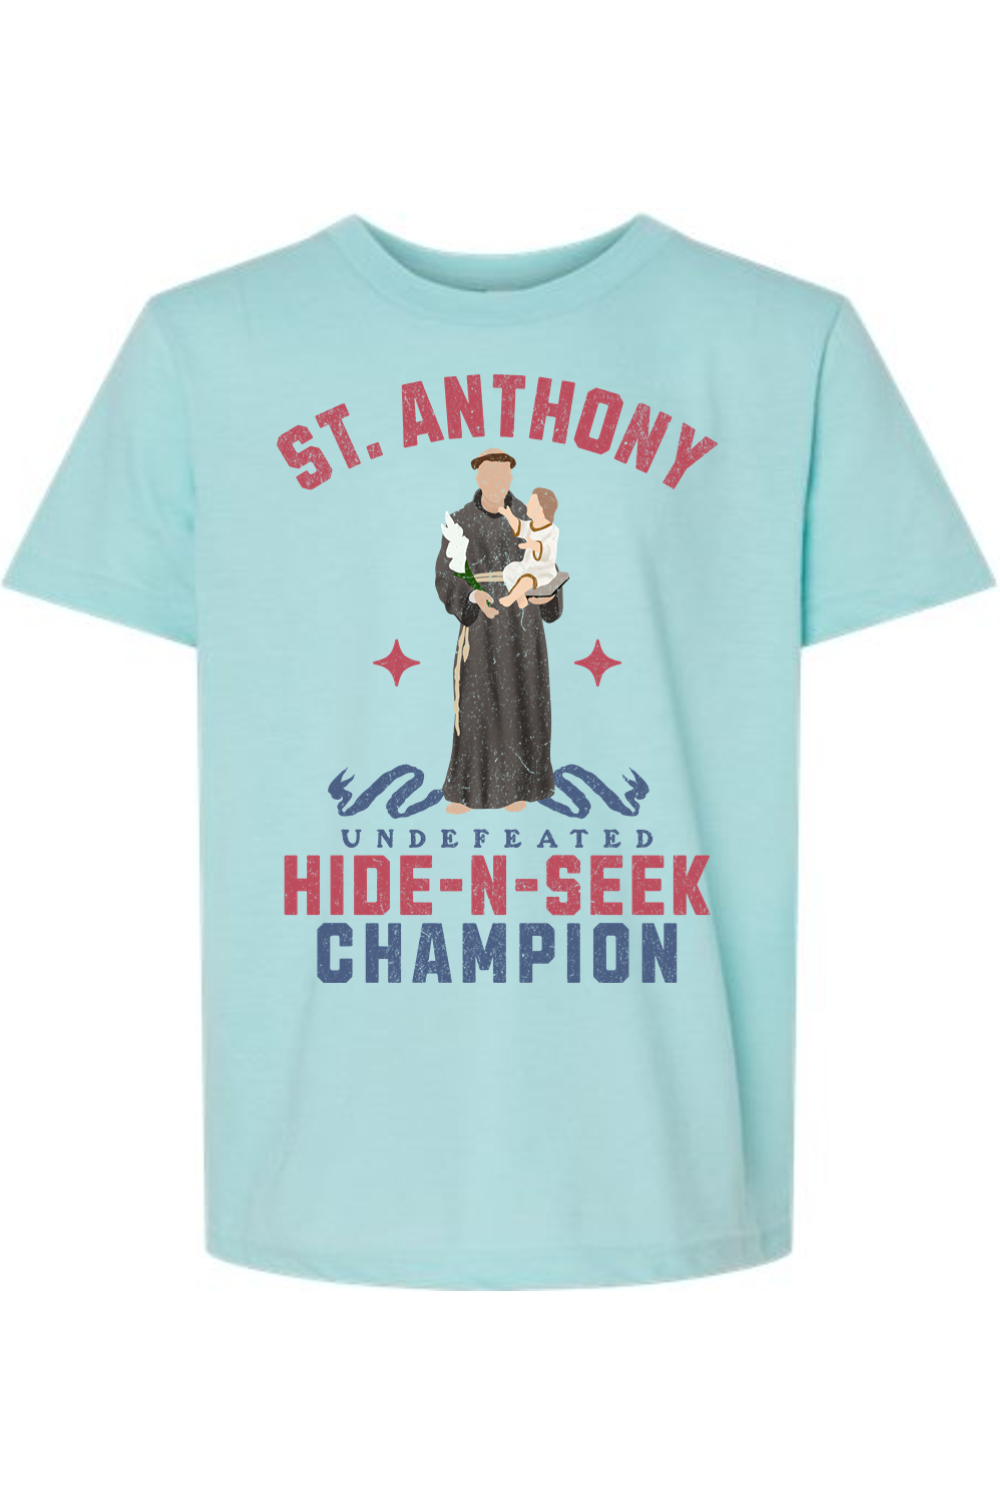 St. Anthony - Undefeated Hide and Seek Champion - Kids T-Shirt